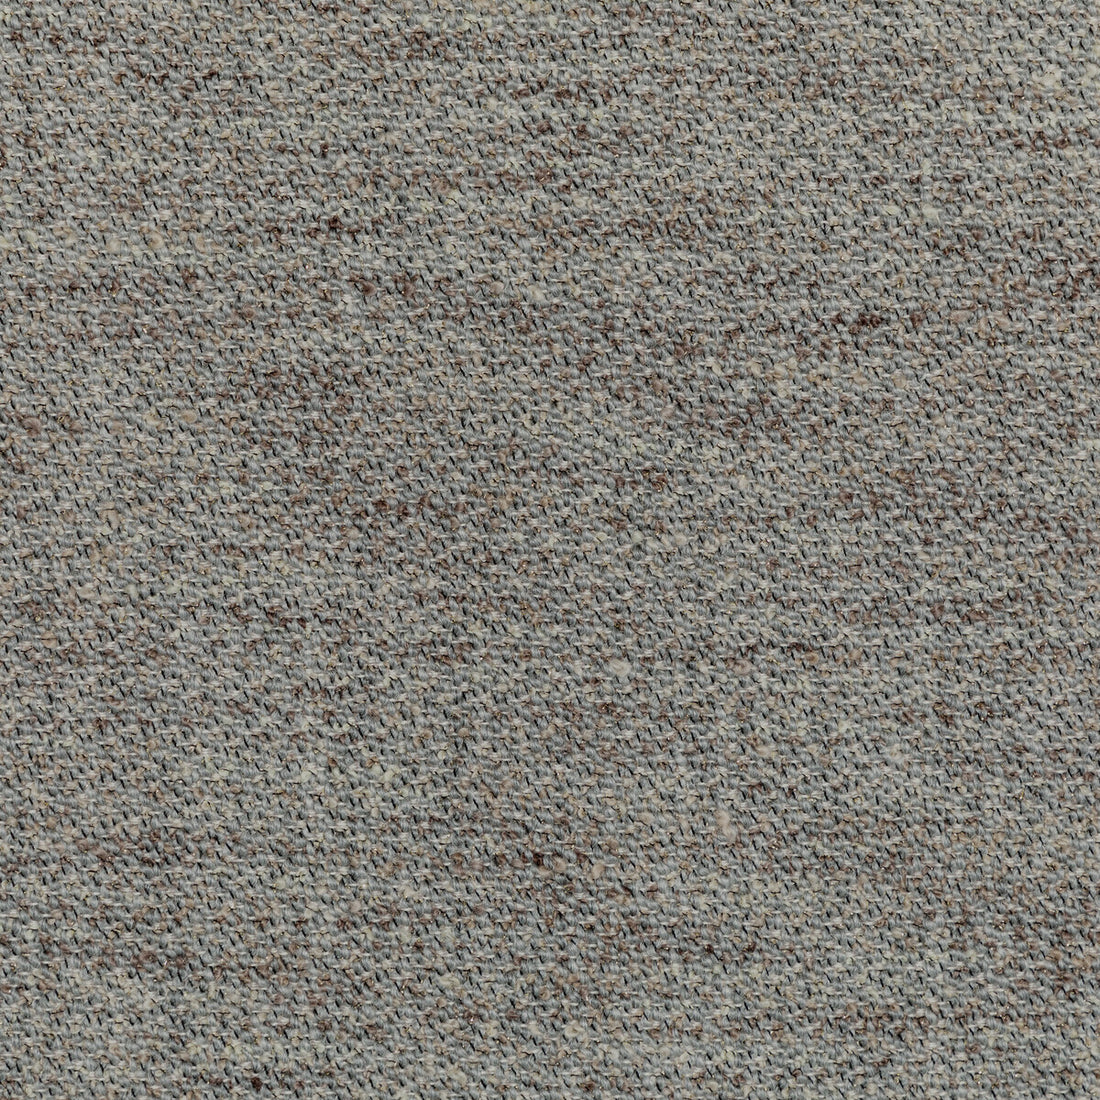 Fashion House fabric in greystone color - pattern 36108.52.0 - by Kravet Couture in the Luxury Textures II collection